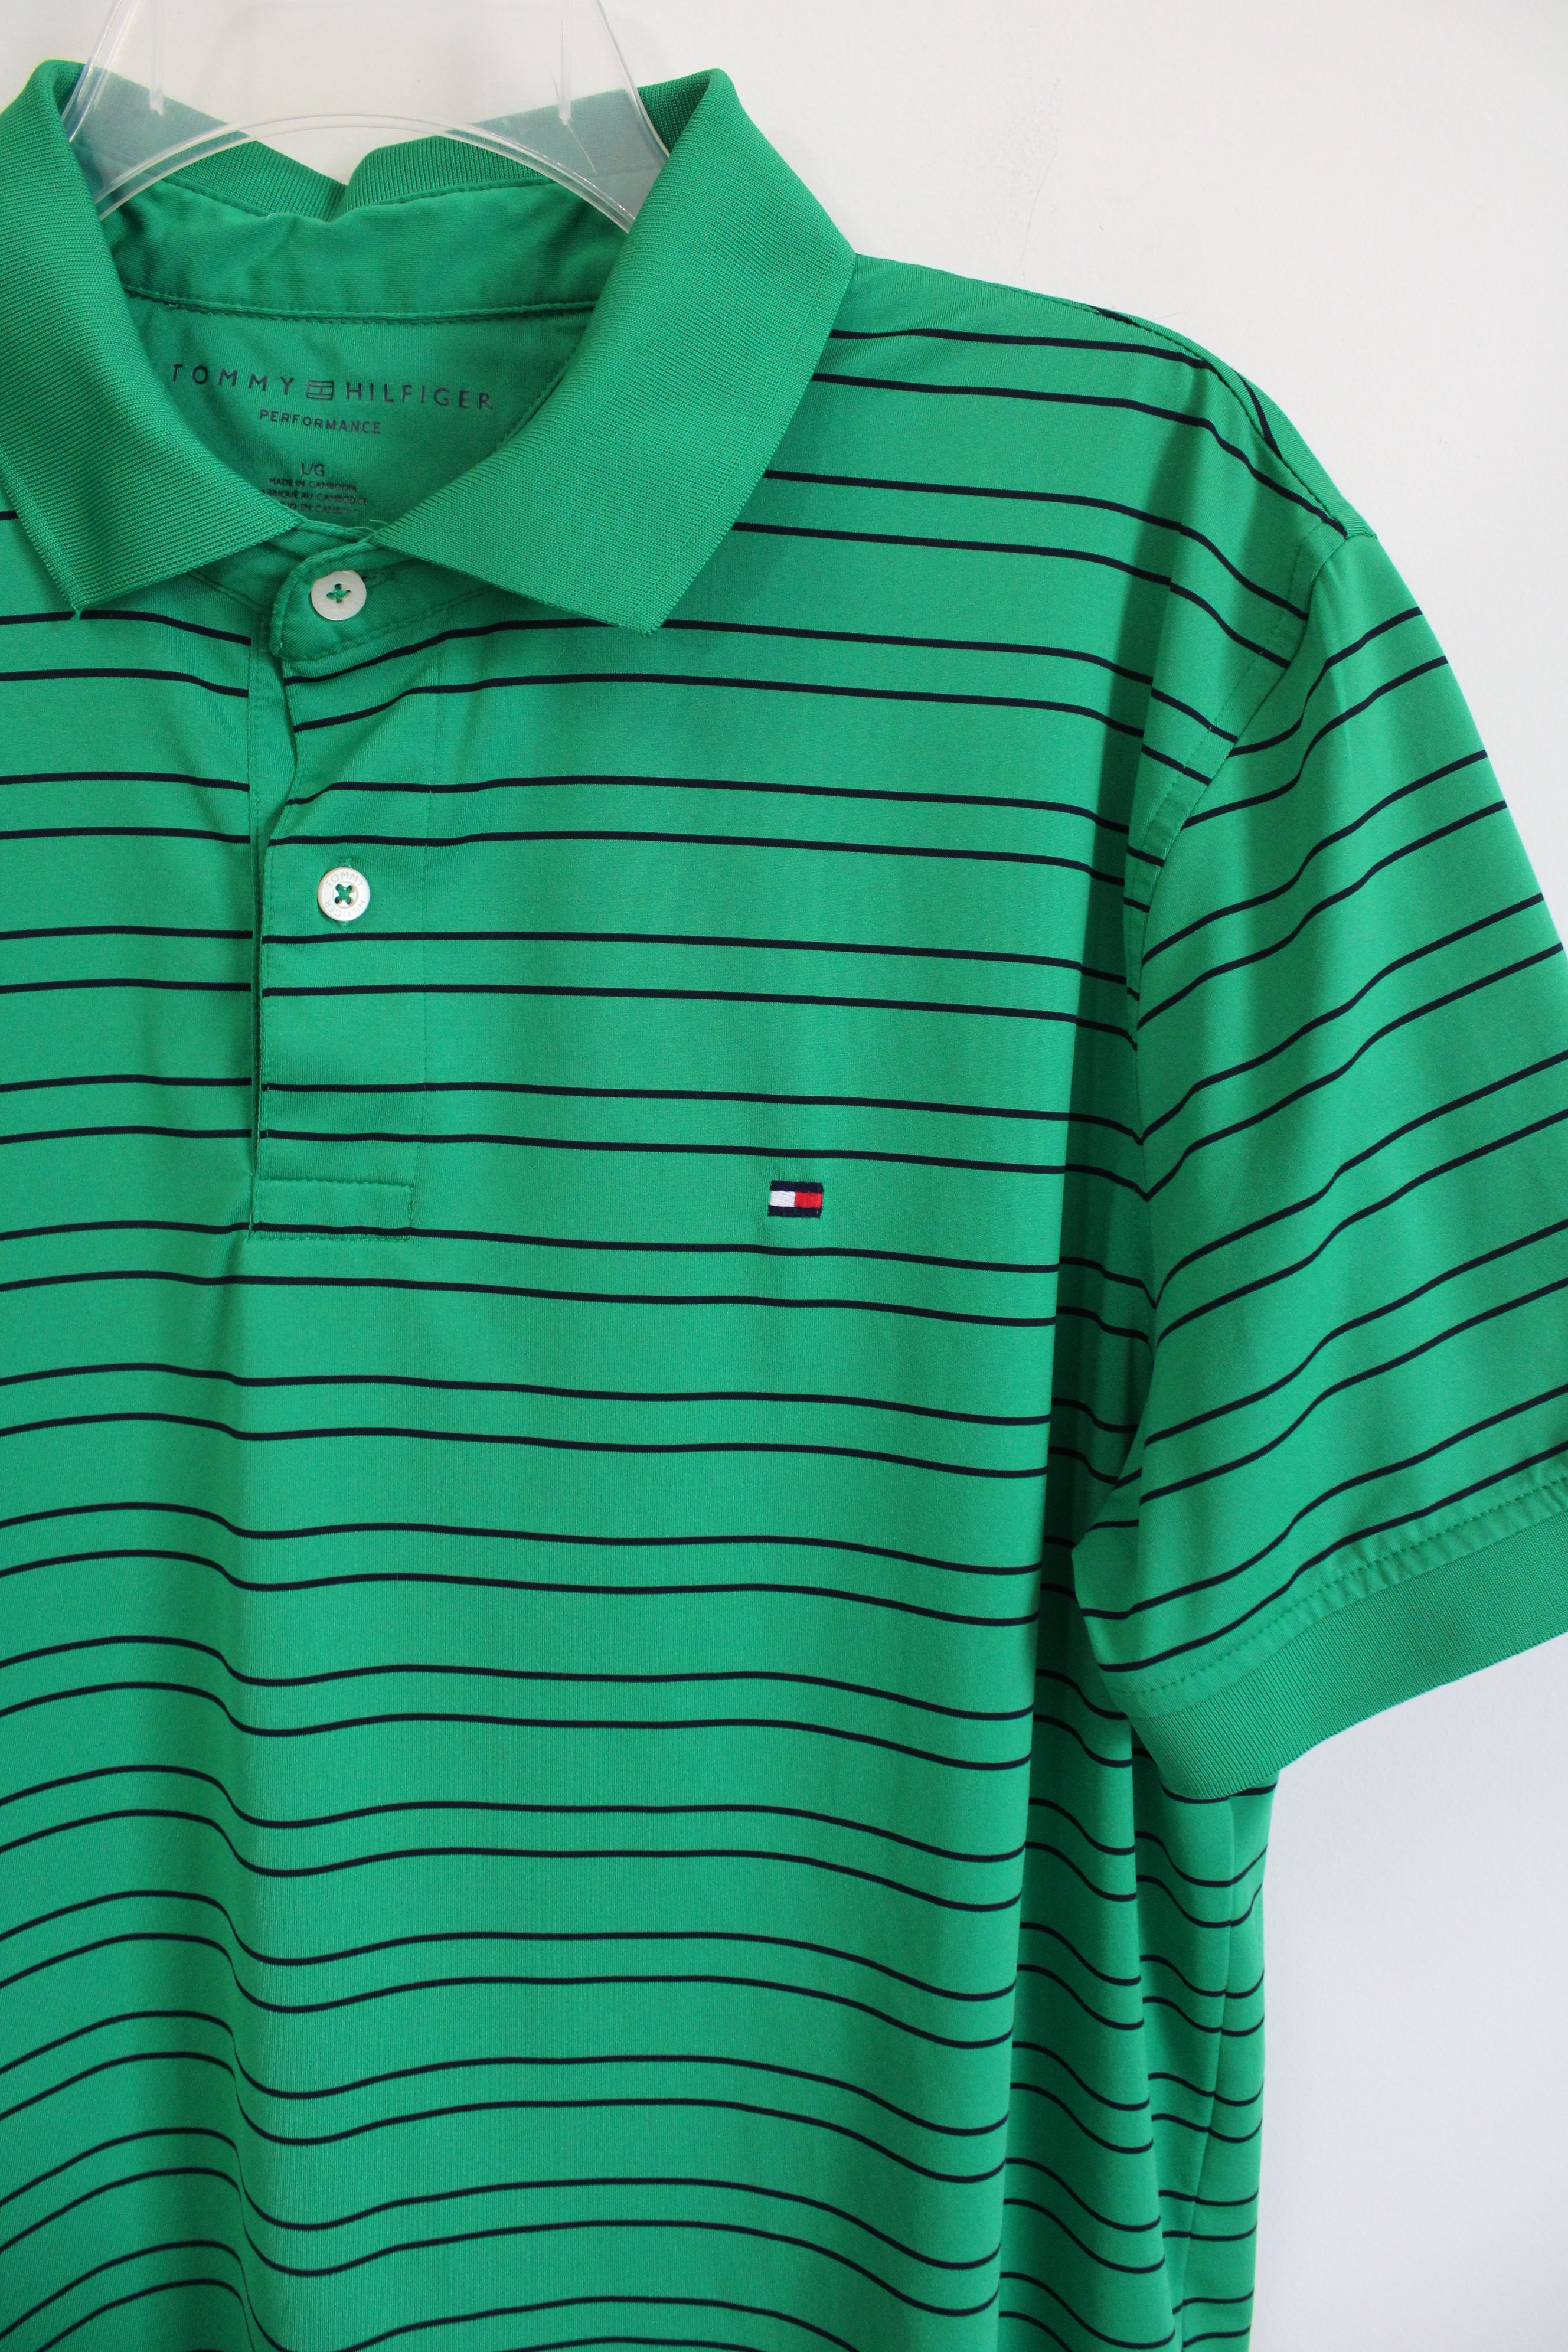 Tommy Hilfiger Performance Green Navy Blue Striped Polo Shirt | L